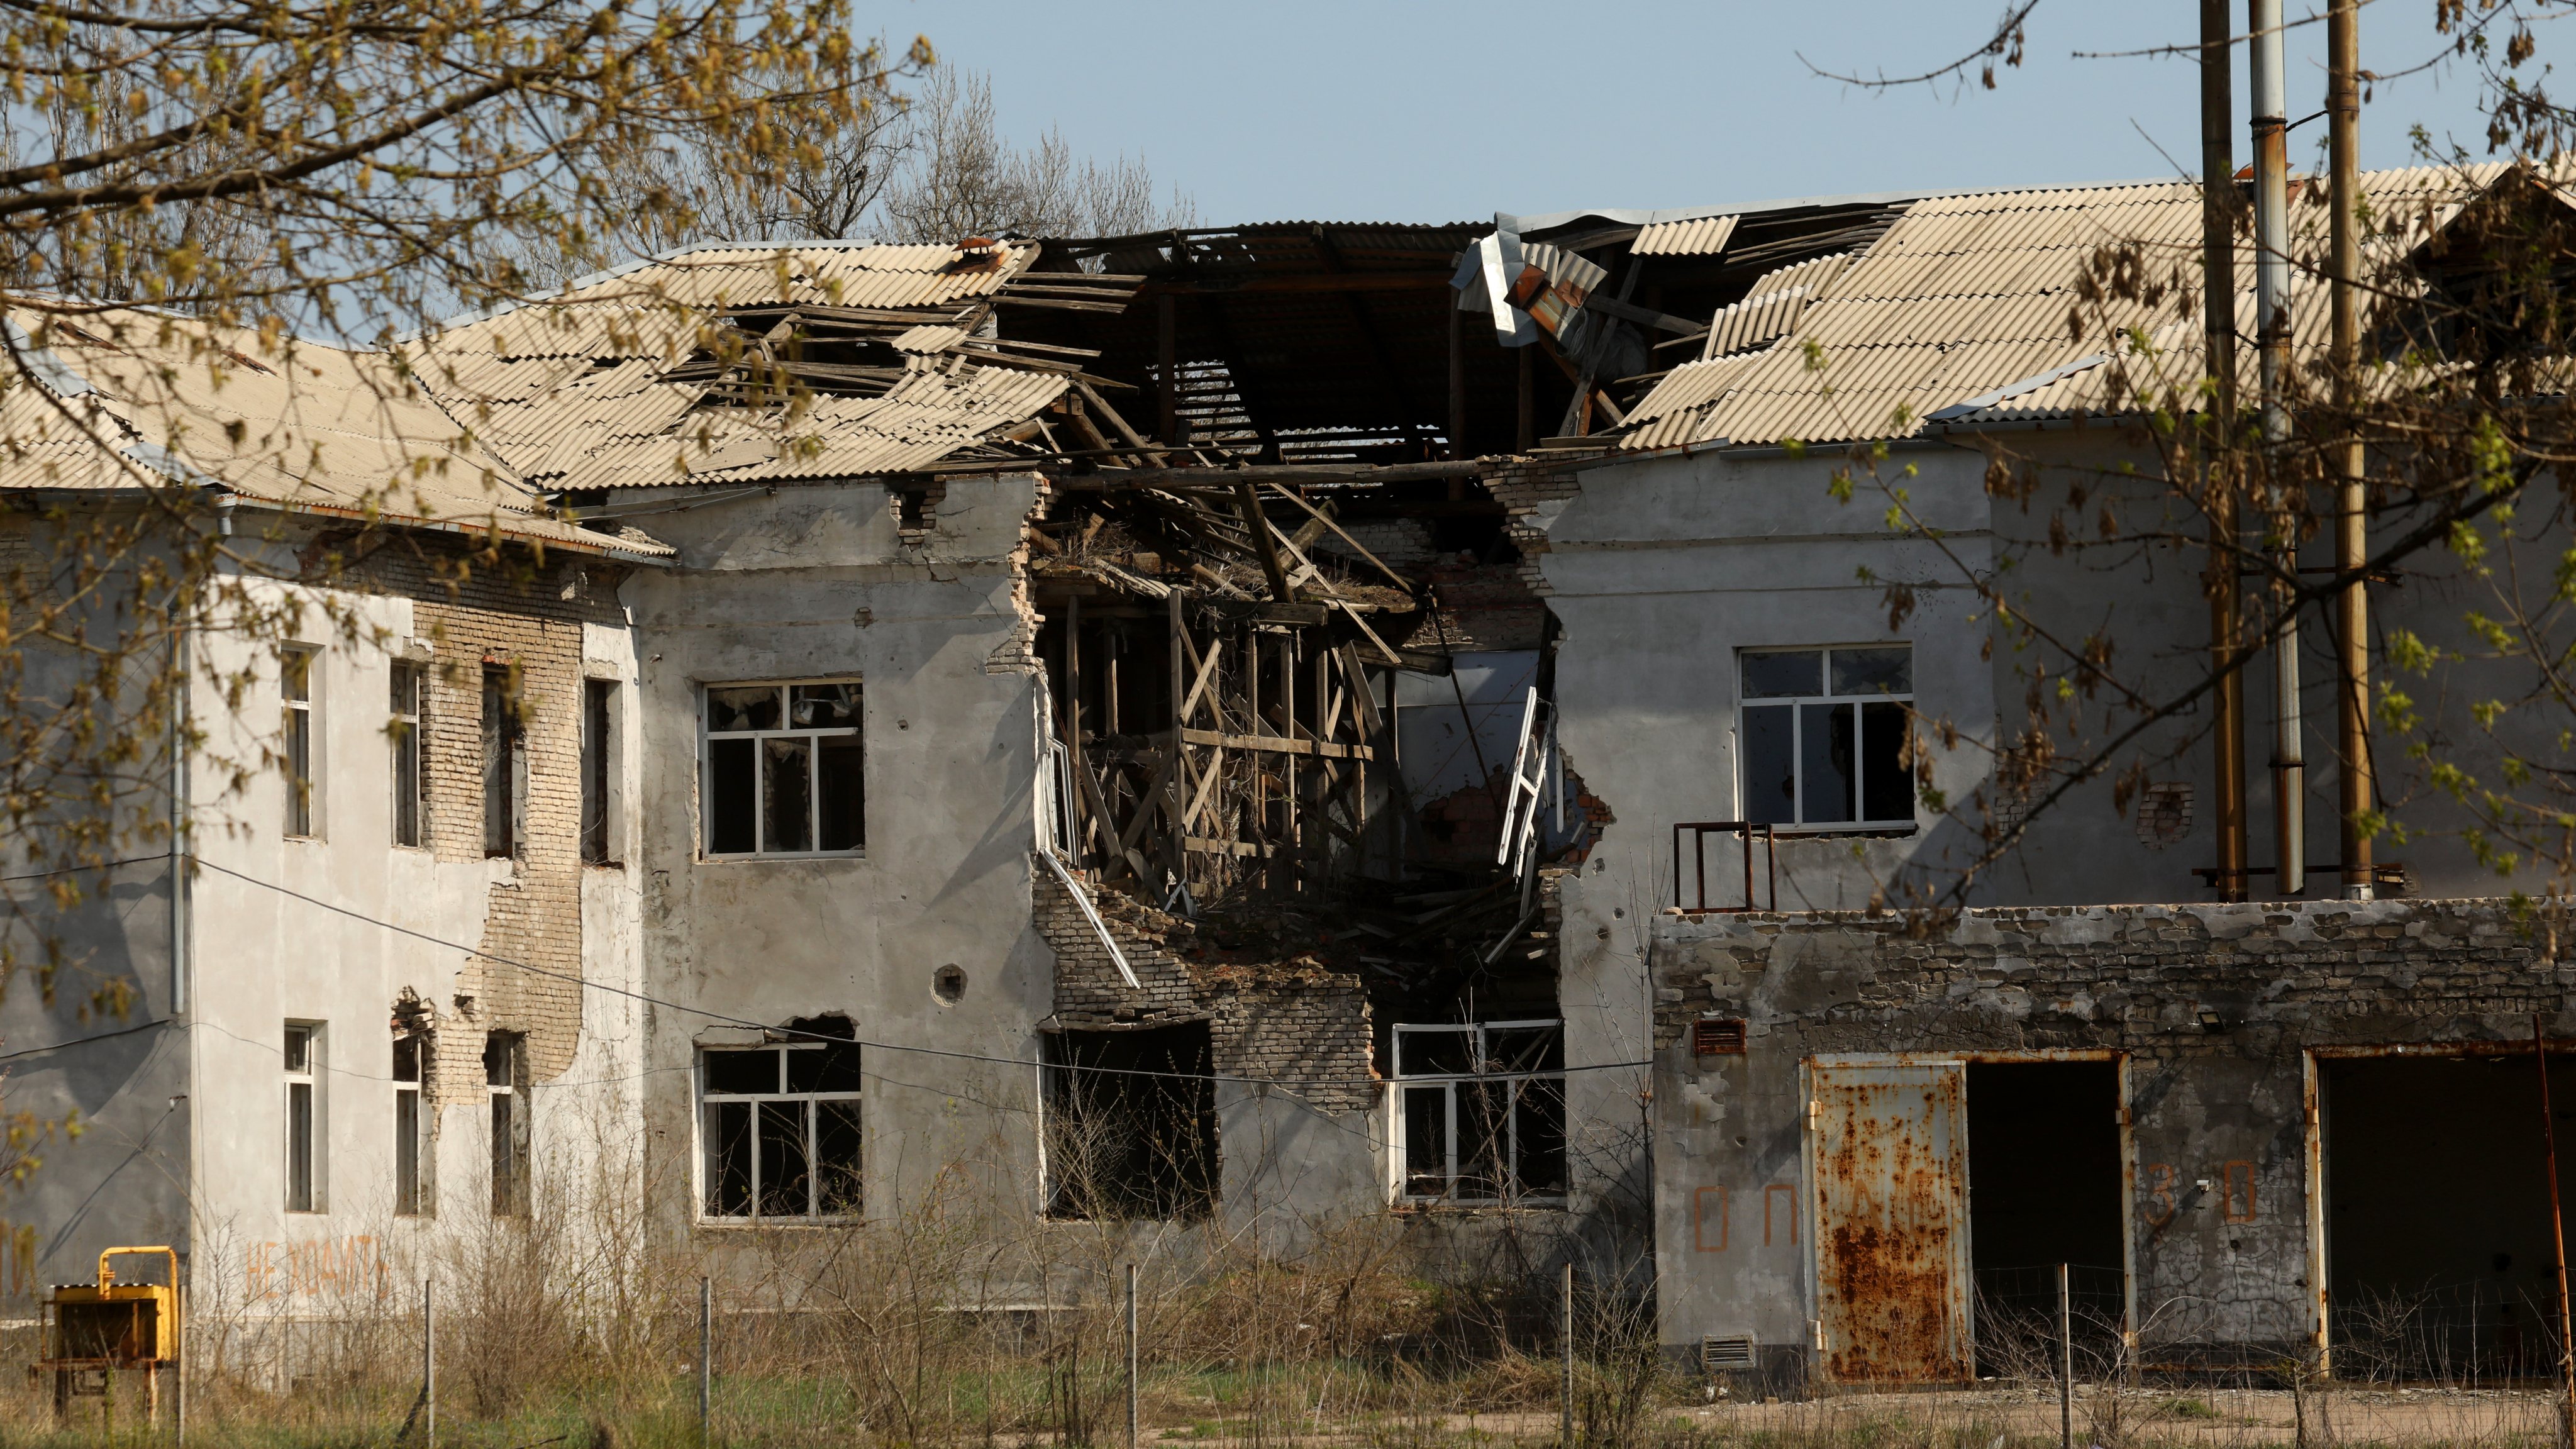 The Ukraine - Russia war continues in the town of Severodonetsk, where most residents have left, but a few remain on July 15, 2022. .